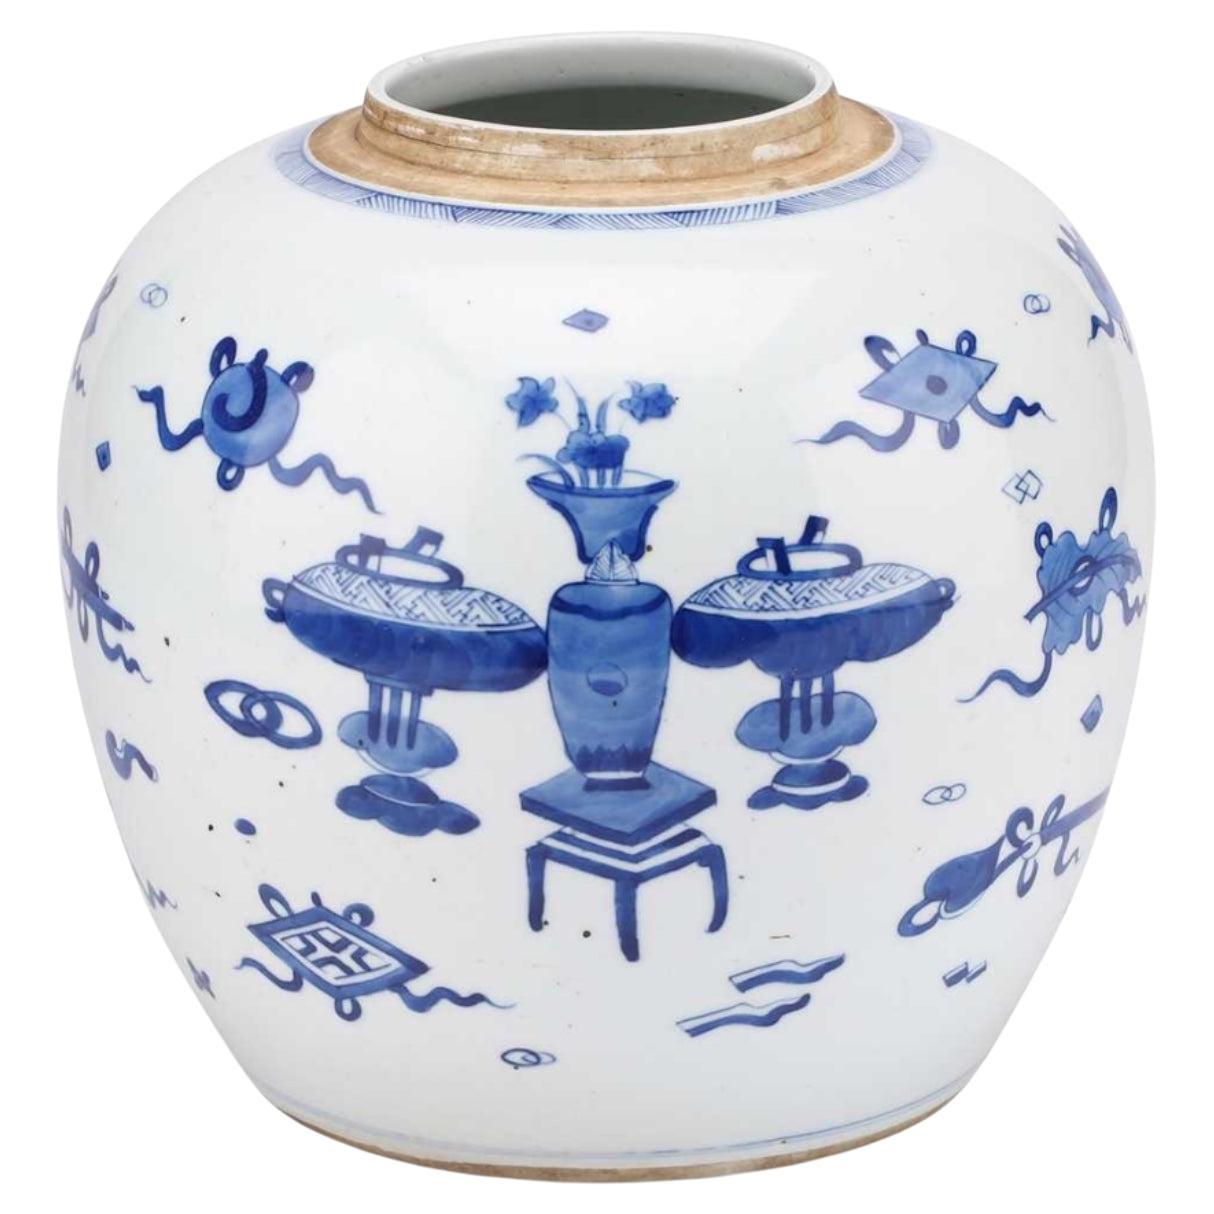 A Very Nice Large Chinese Blue and White Ginger Jar/Vase. 19th C. For Sale